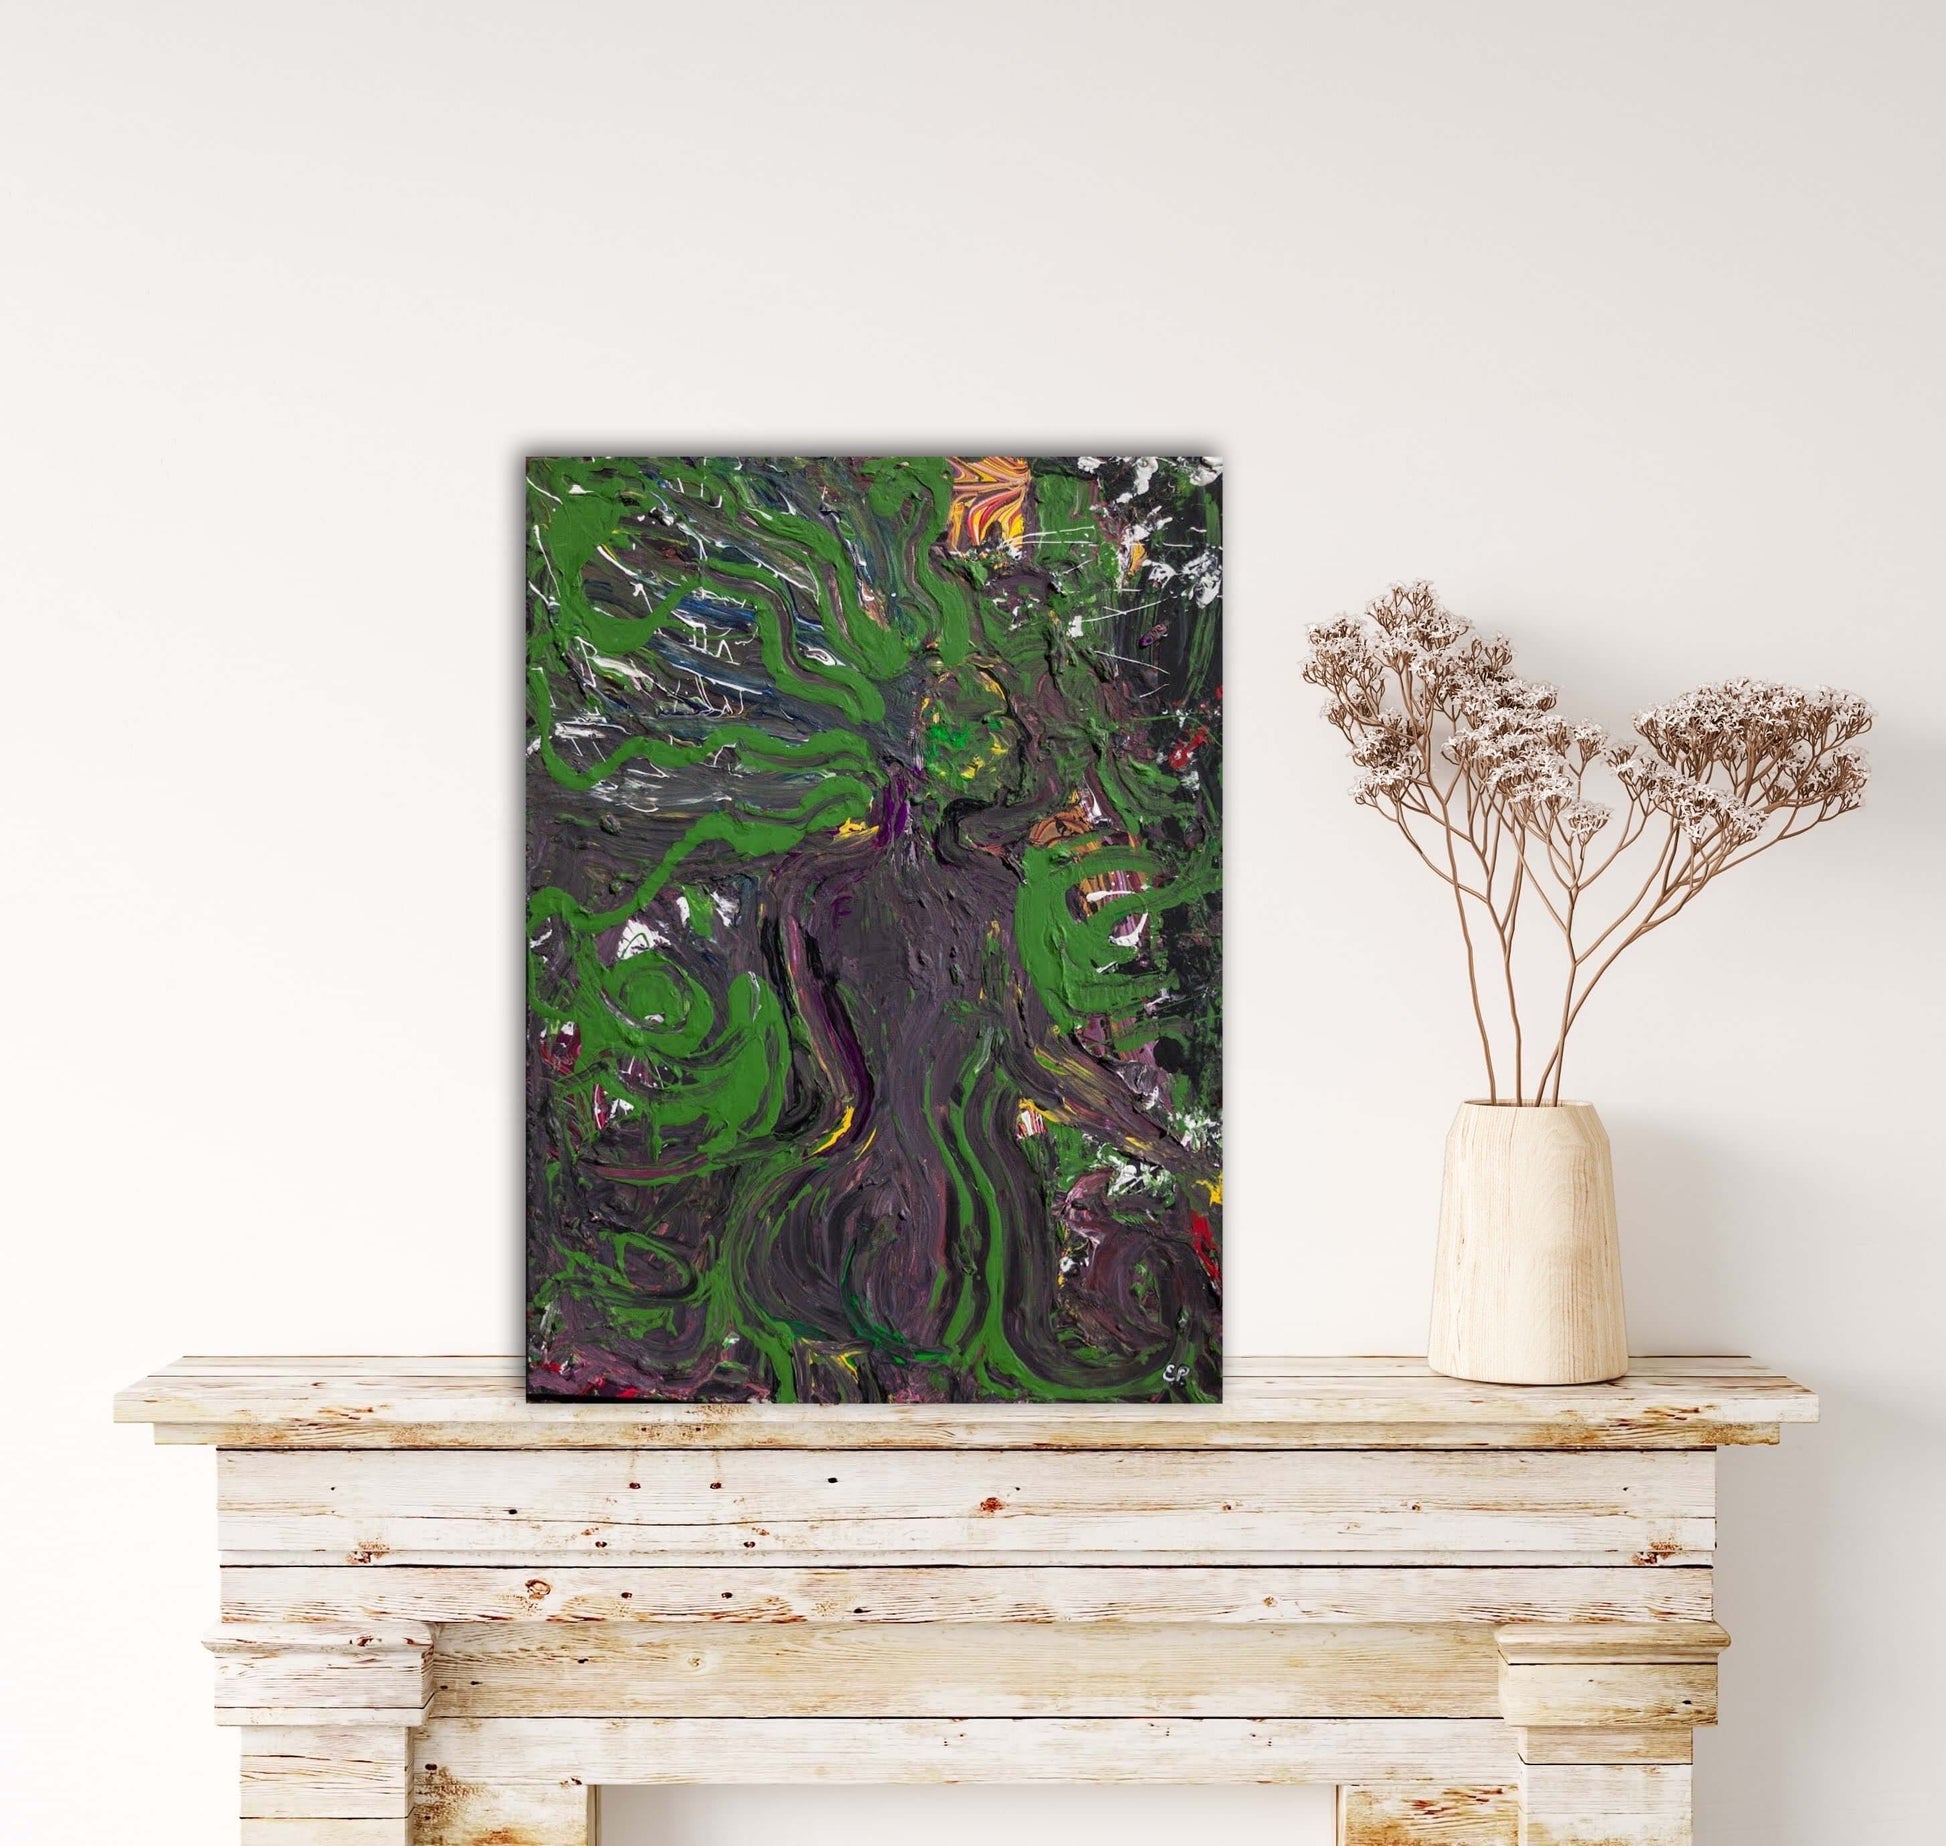 Mother Earth - Textured, Large Size, Acrylic On Canvas, Painting Of A Naked Woman, Earthy Vibe, Wall Art by Art With Evie